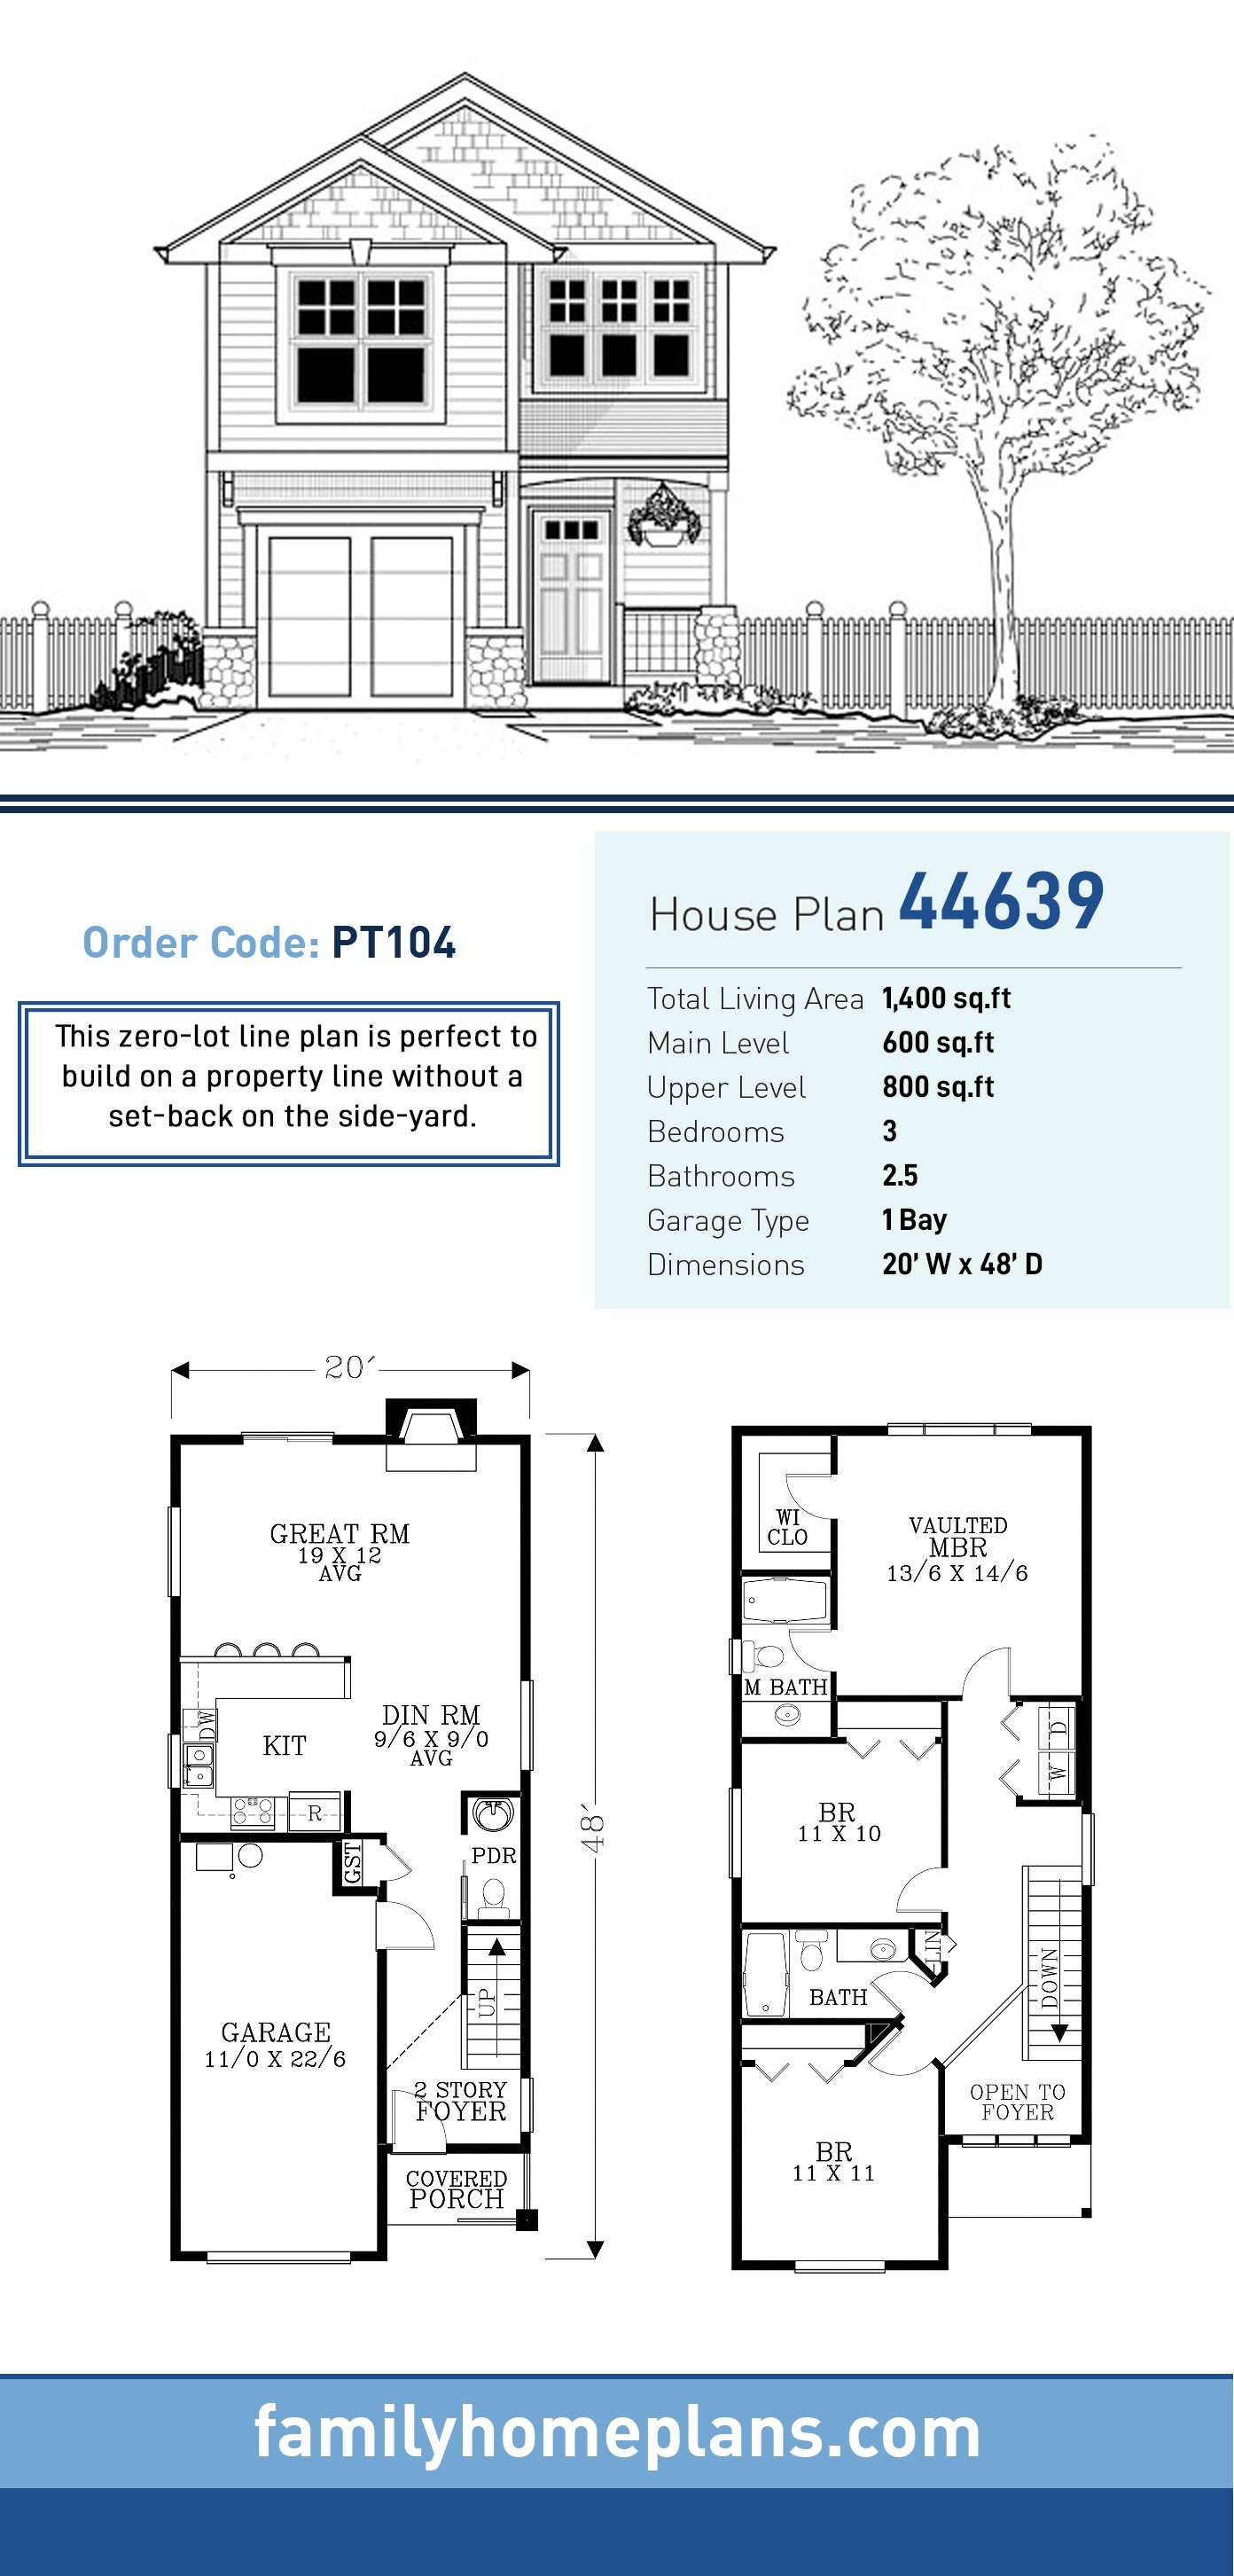 House Plan 44639 Traditional Style With 1400 Sq Ft 3 Bed 2 Bath 1 Half Bath